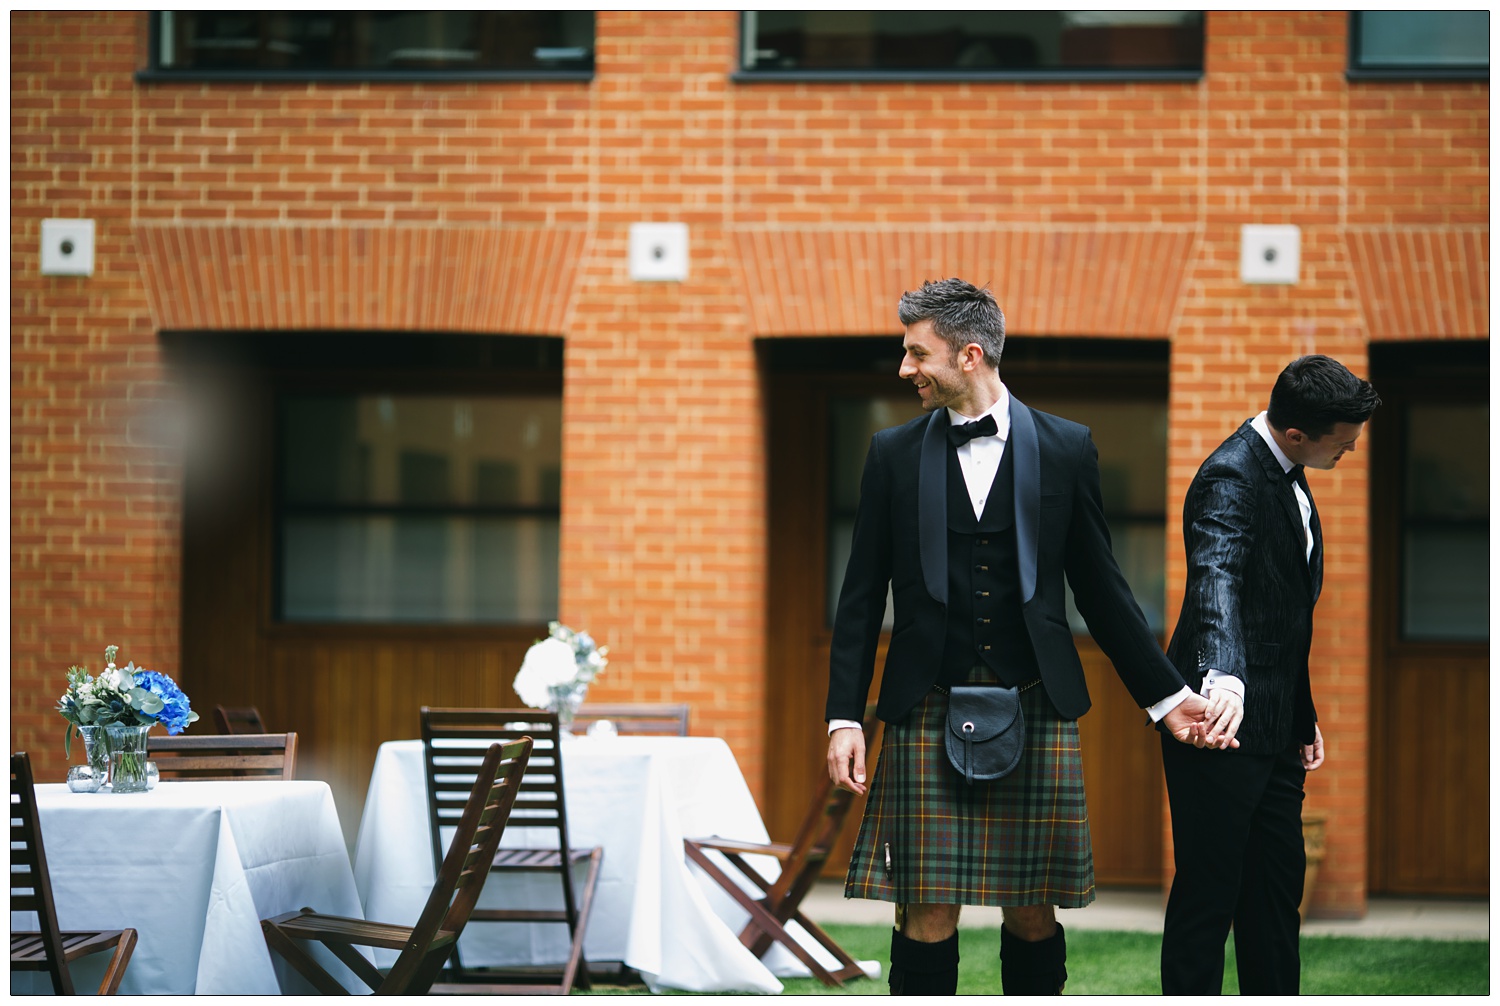 A man in a kilt and man in a suit are holding hands outside in a courtyard.